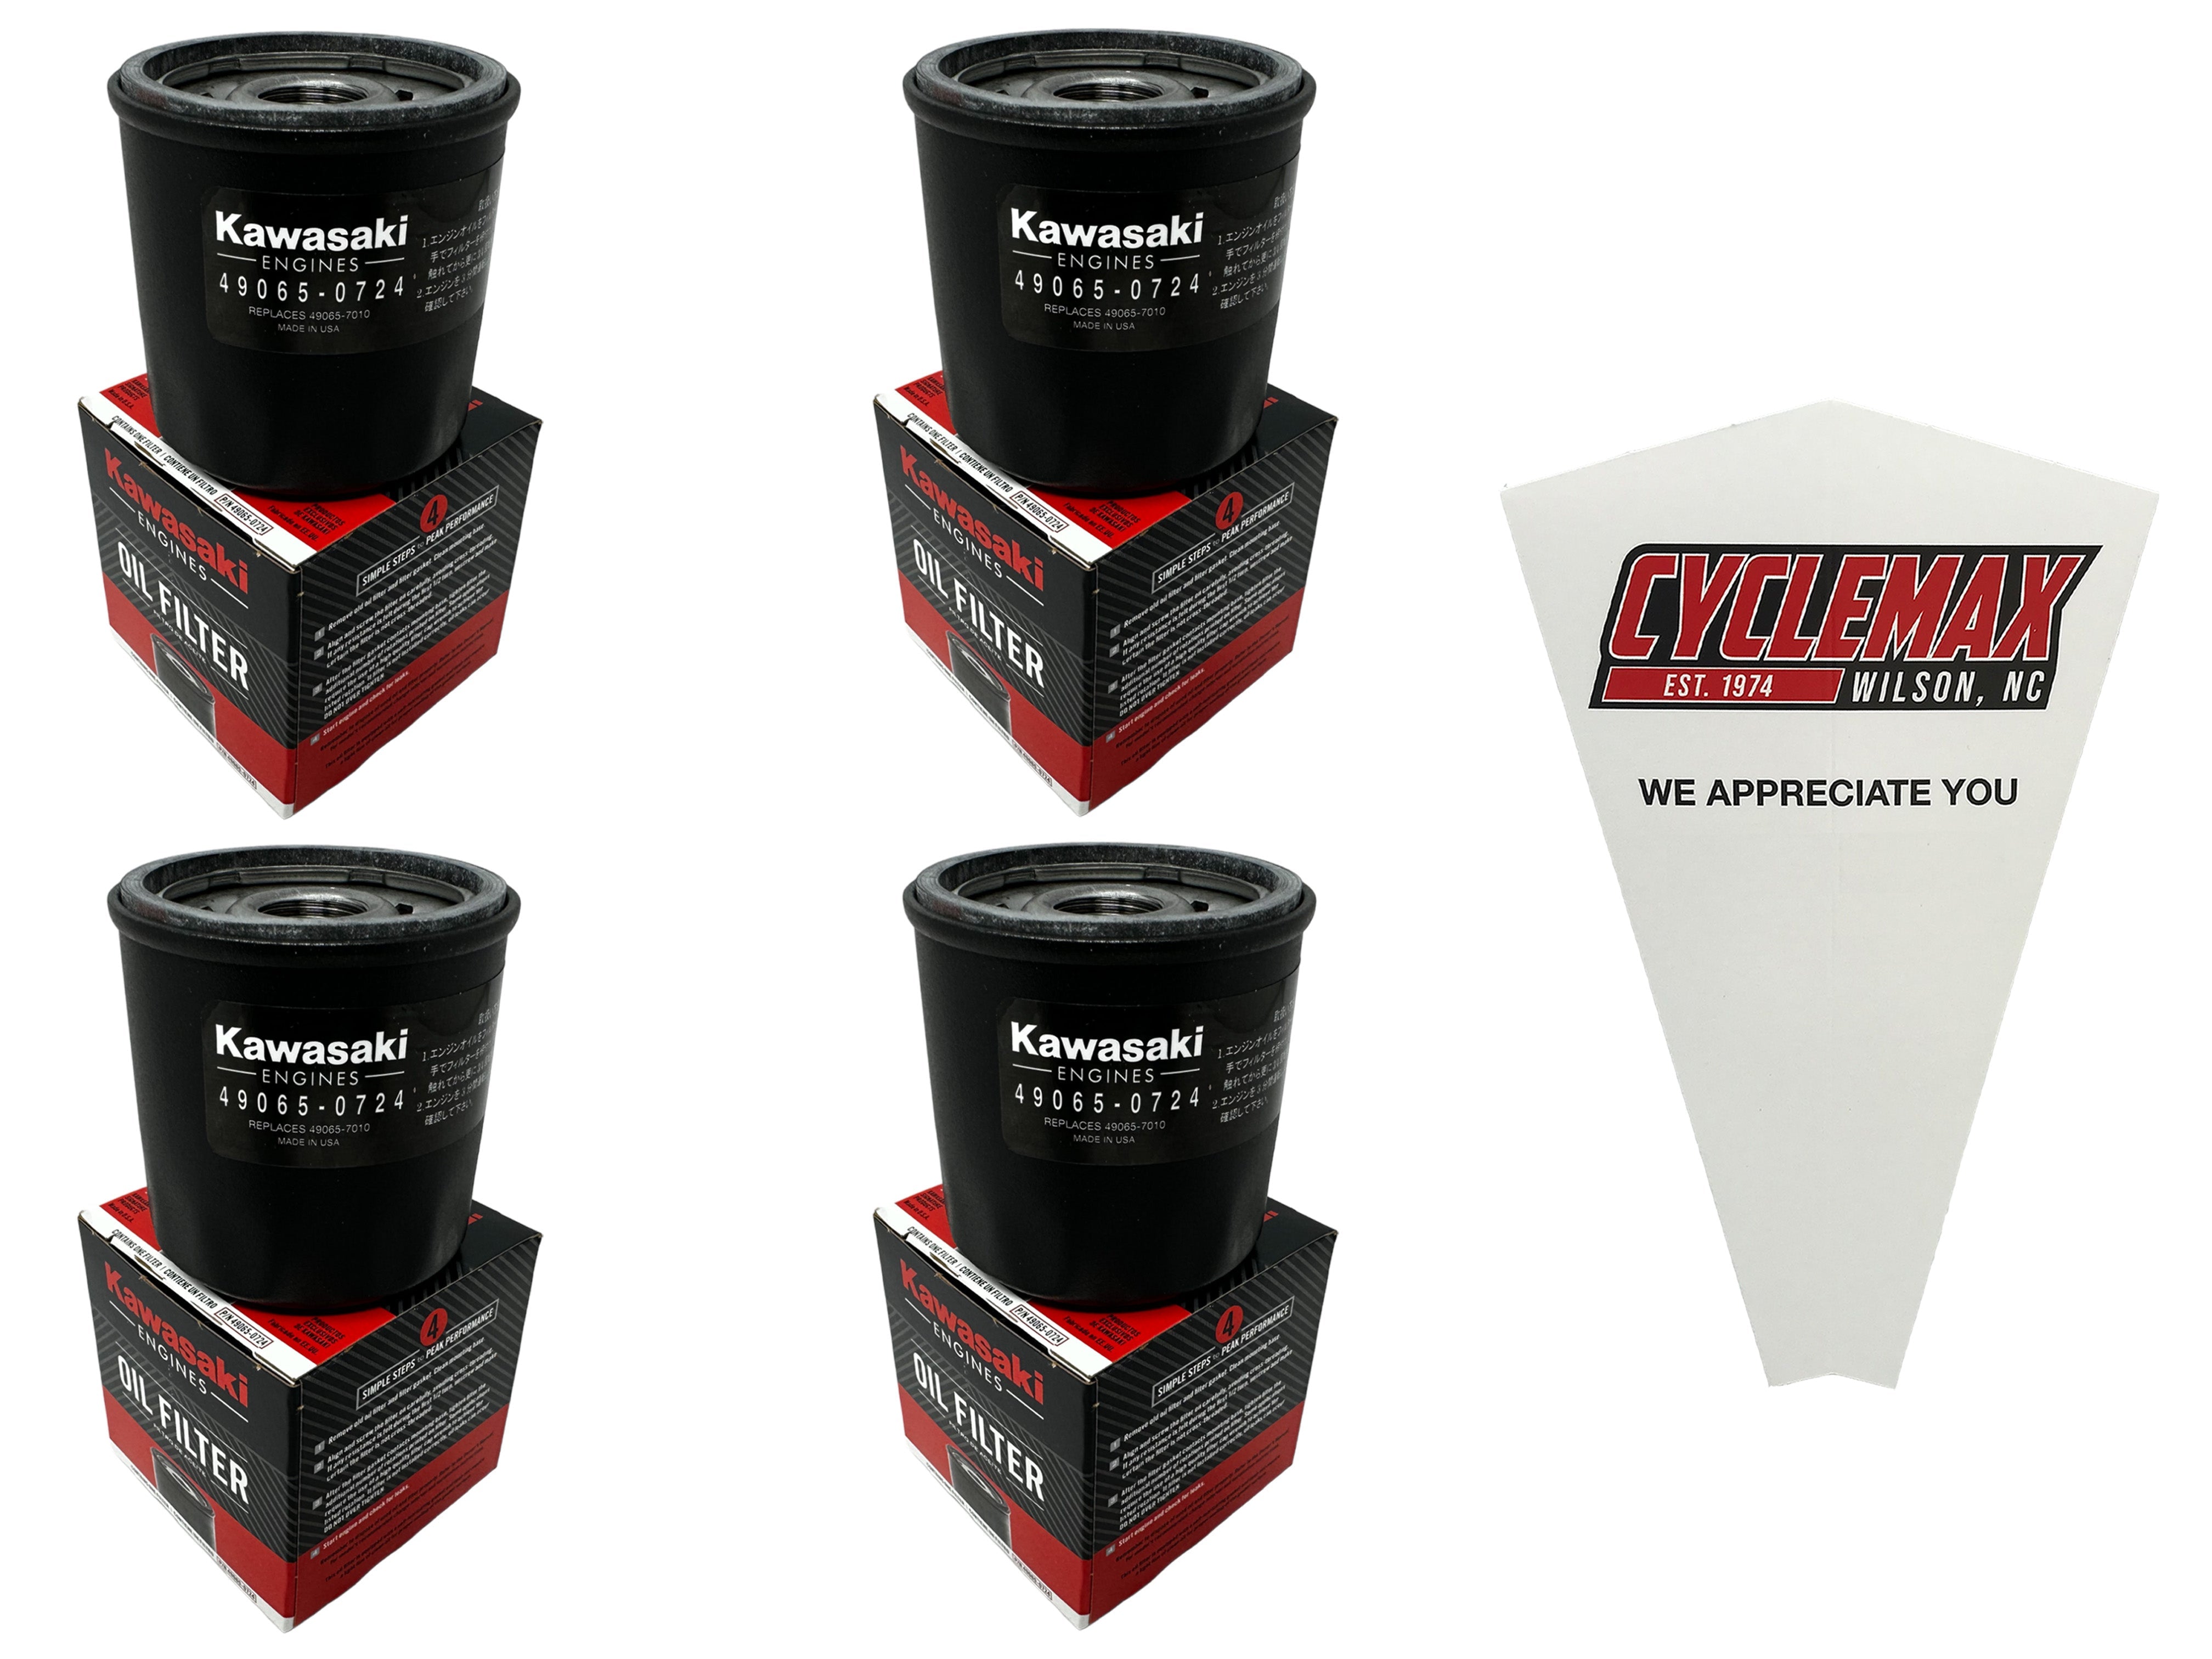 Cyclemax Four Pack for Kawasaki Oil Filter 49065-0724 Contains Four Filters and a Funnel